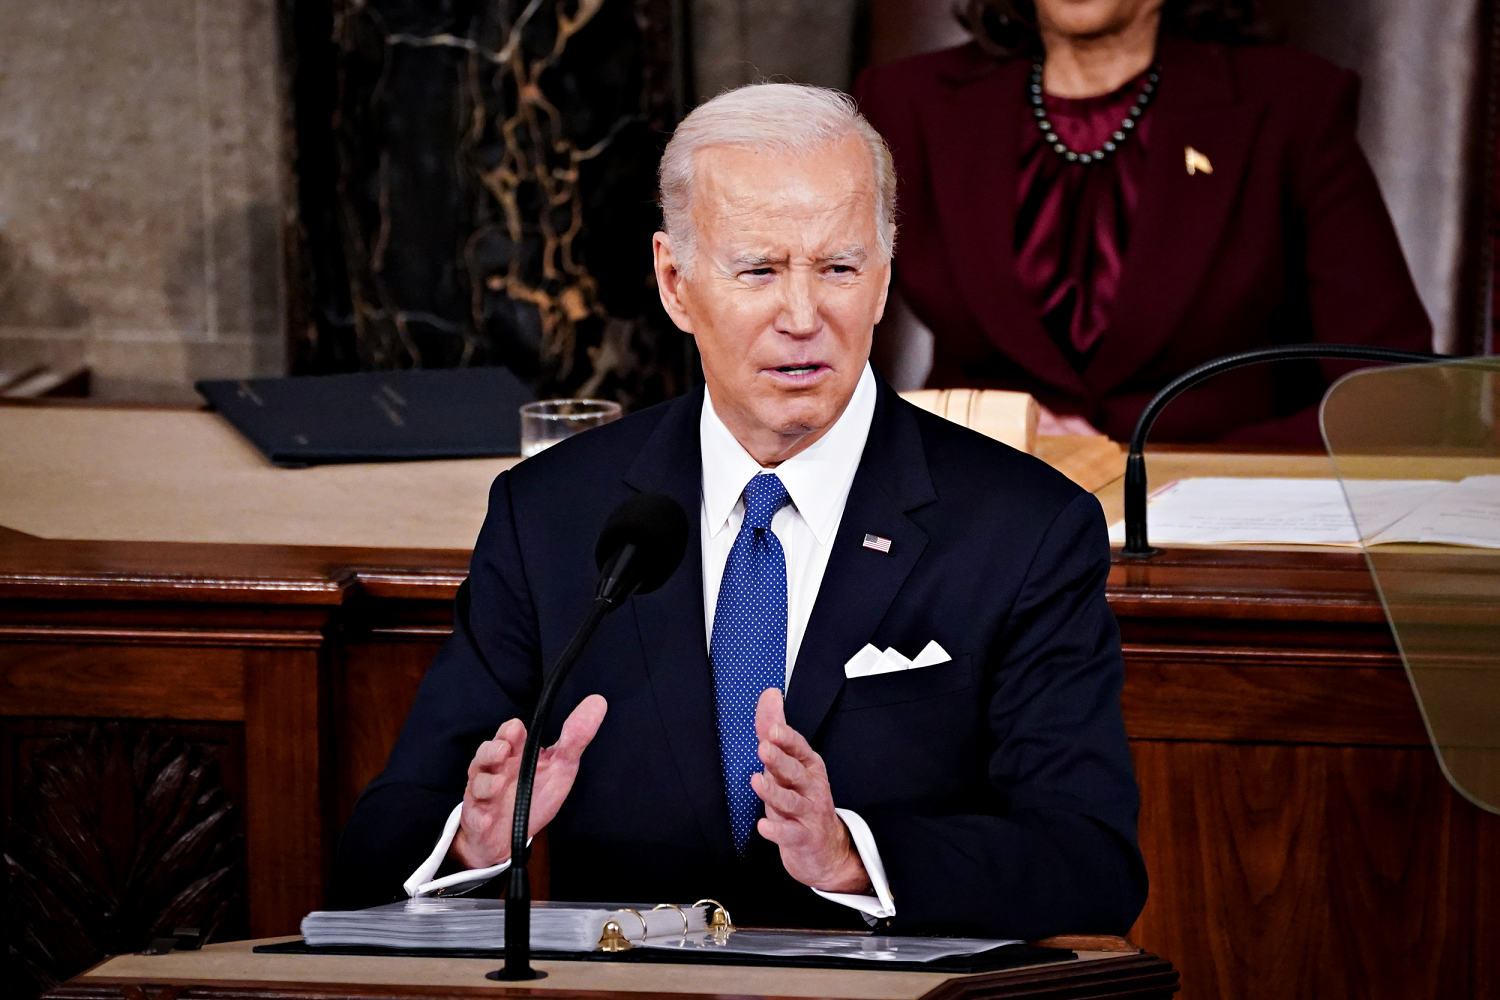 How the Jan. 6 Committee’s playbook could help Biden fix the State of the Union address